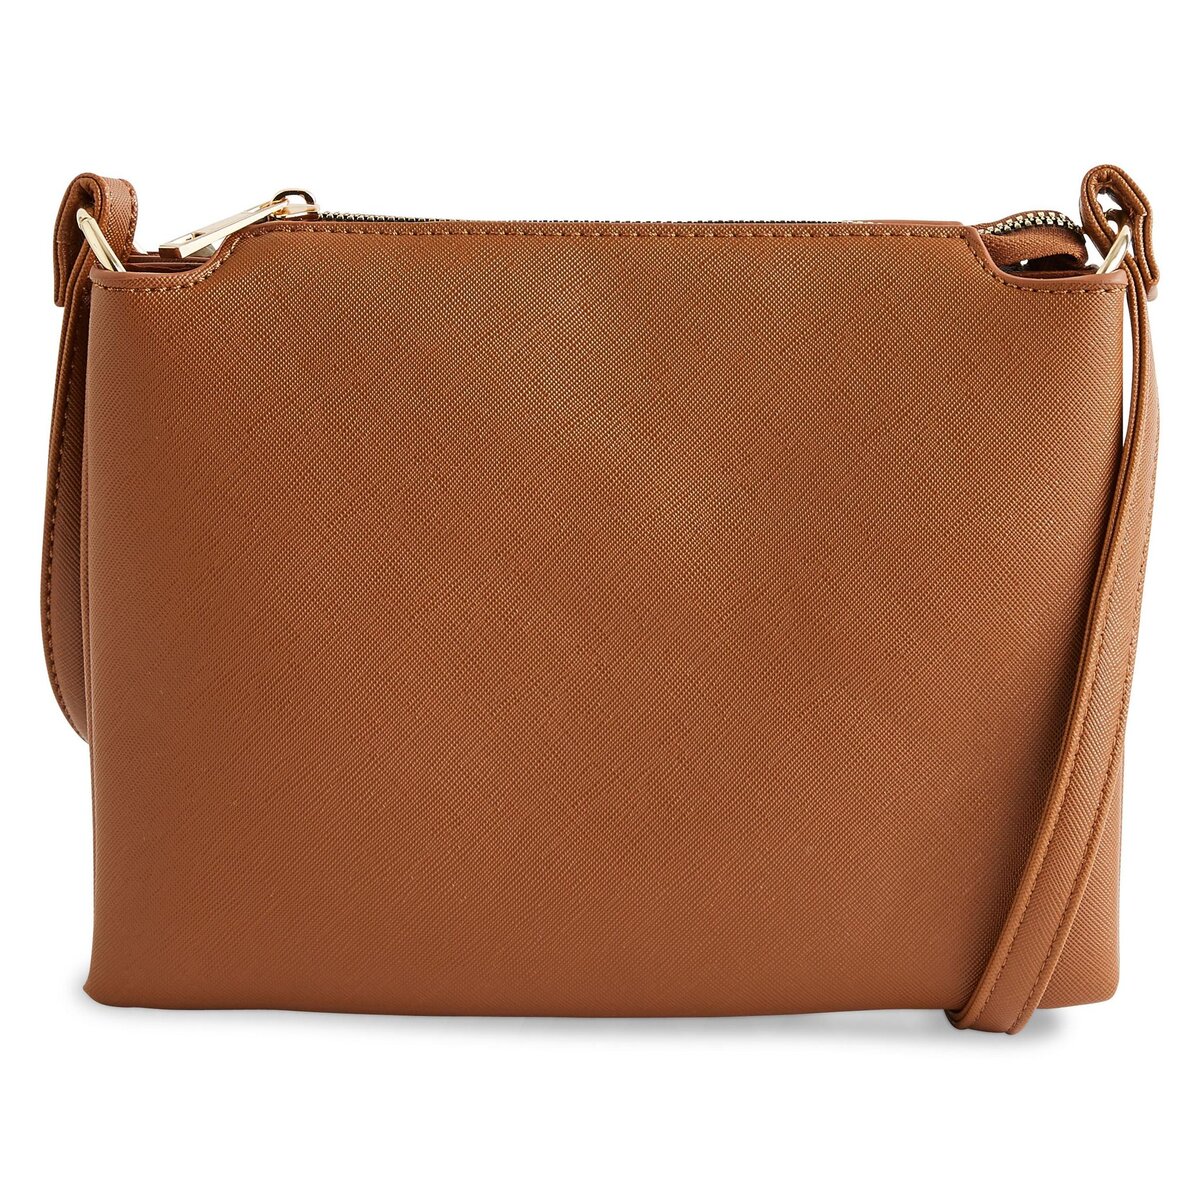 INEXTENSO Sac à main beige camel double poches femme